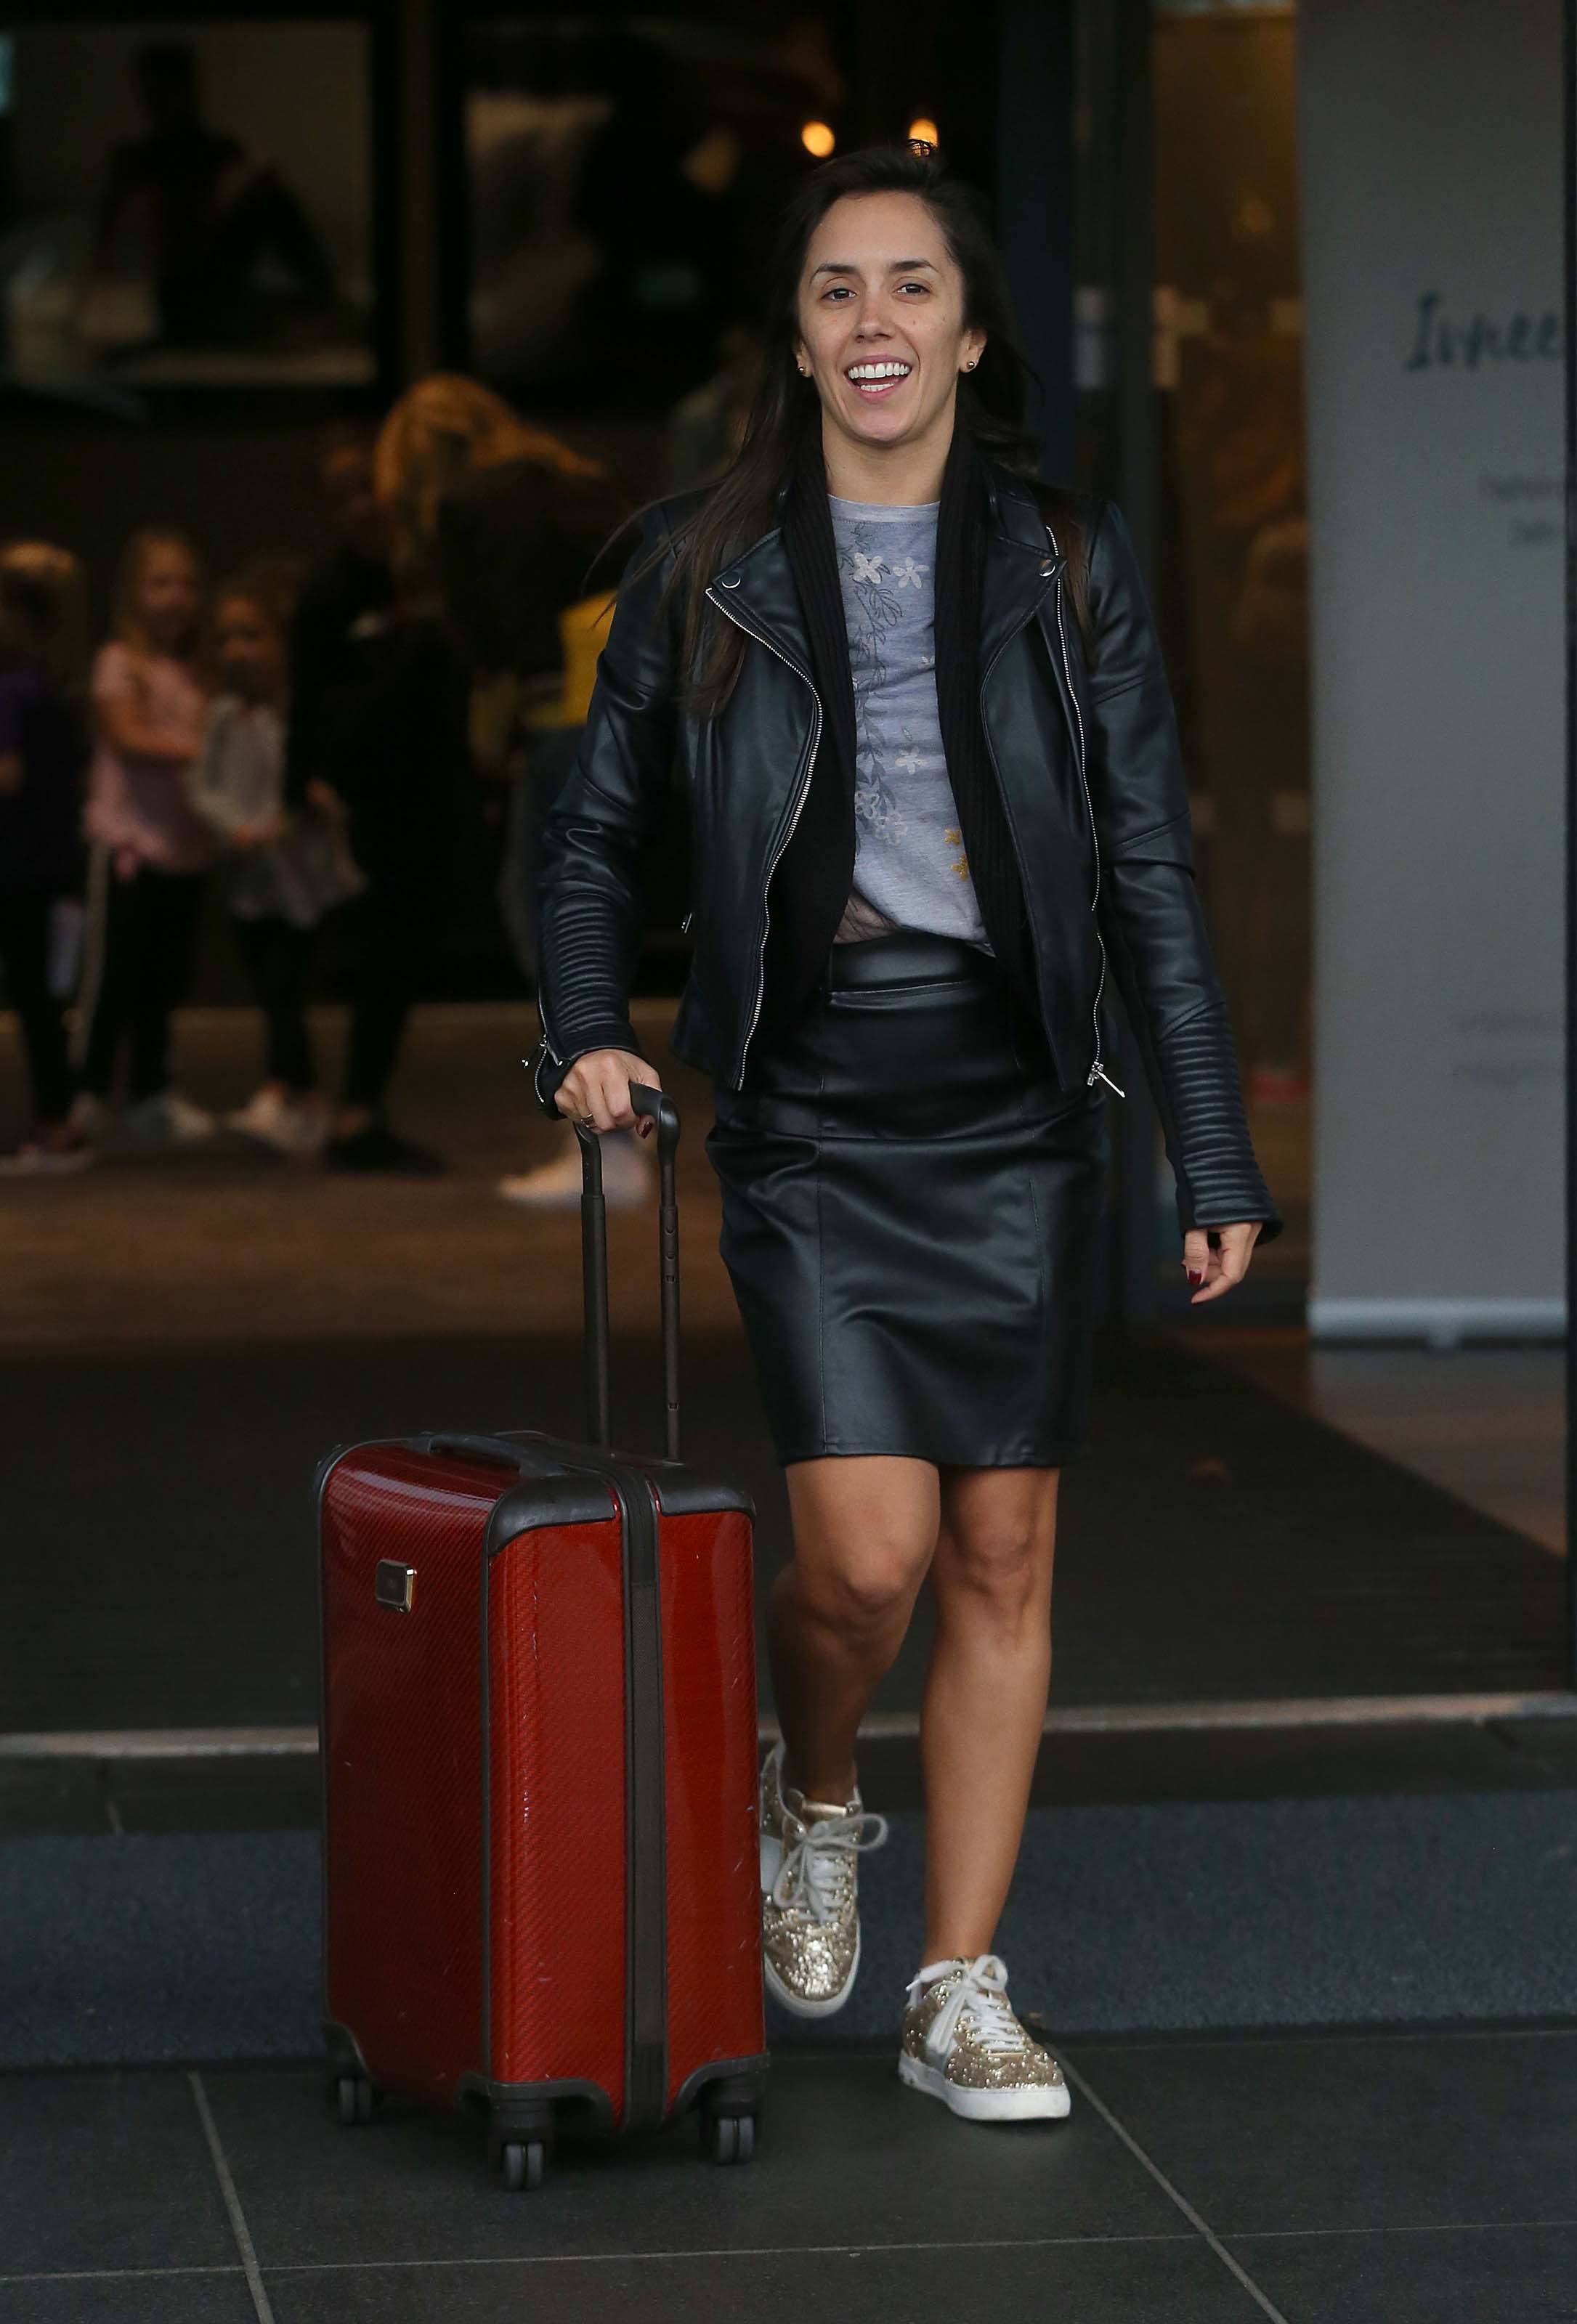 Janette Manrara leaving her hotel for the Movie Week